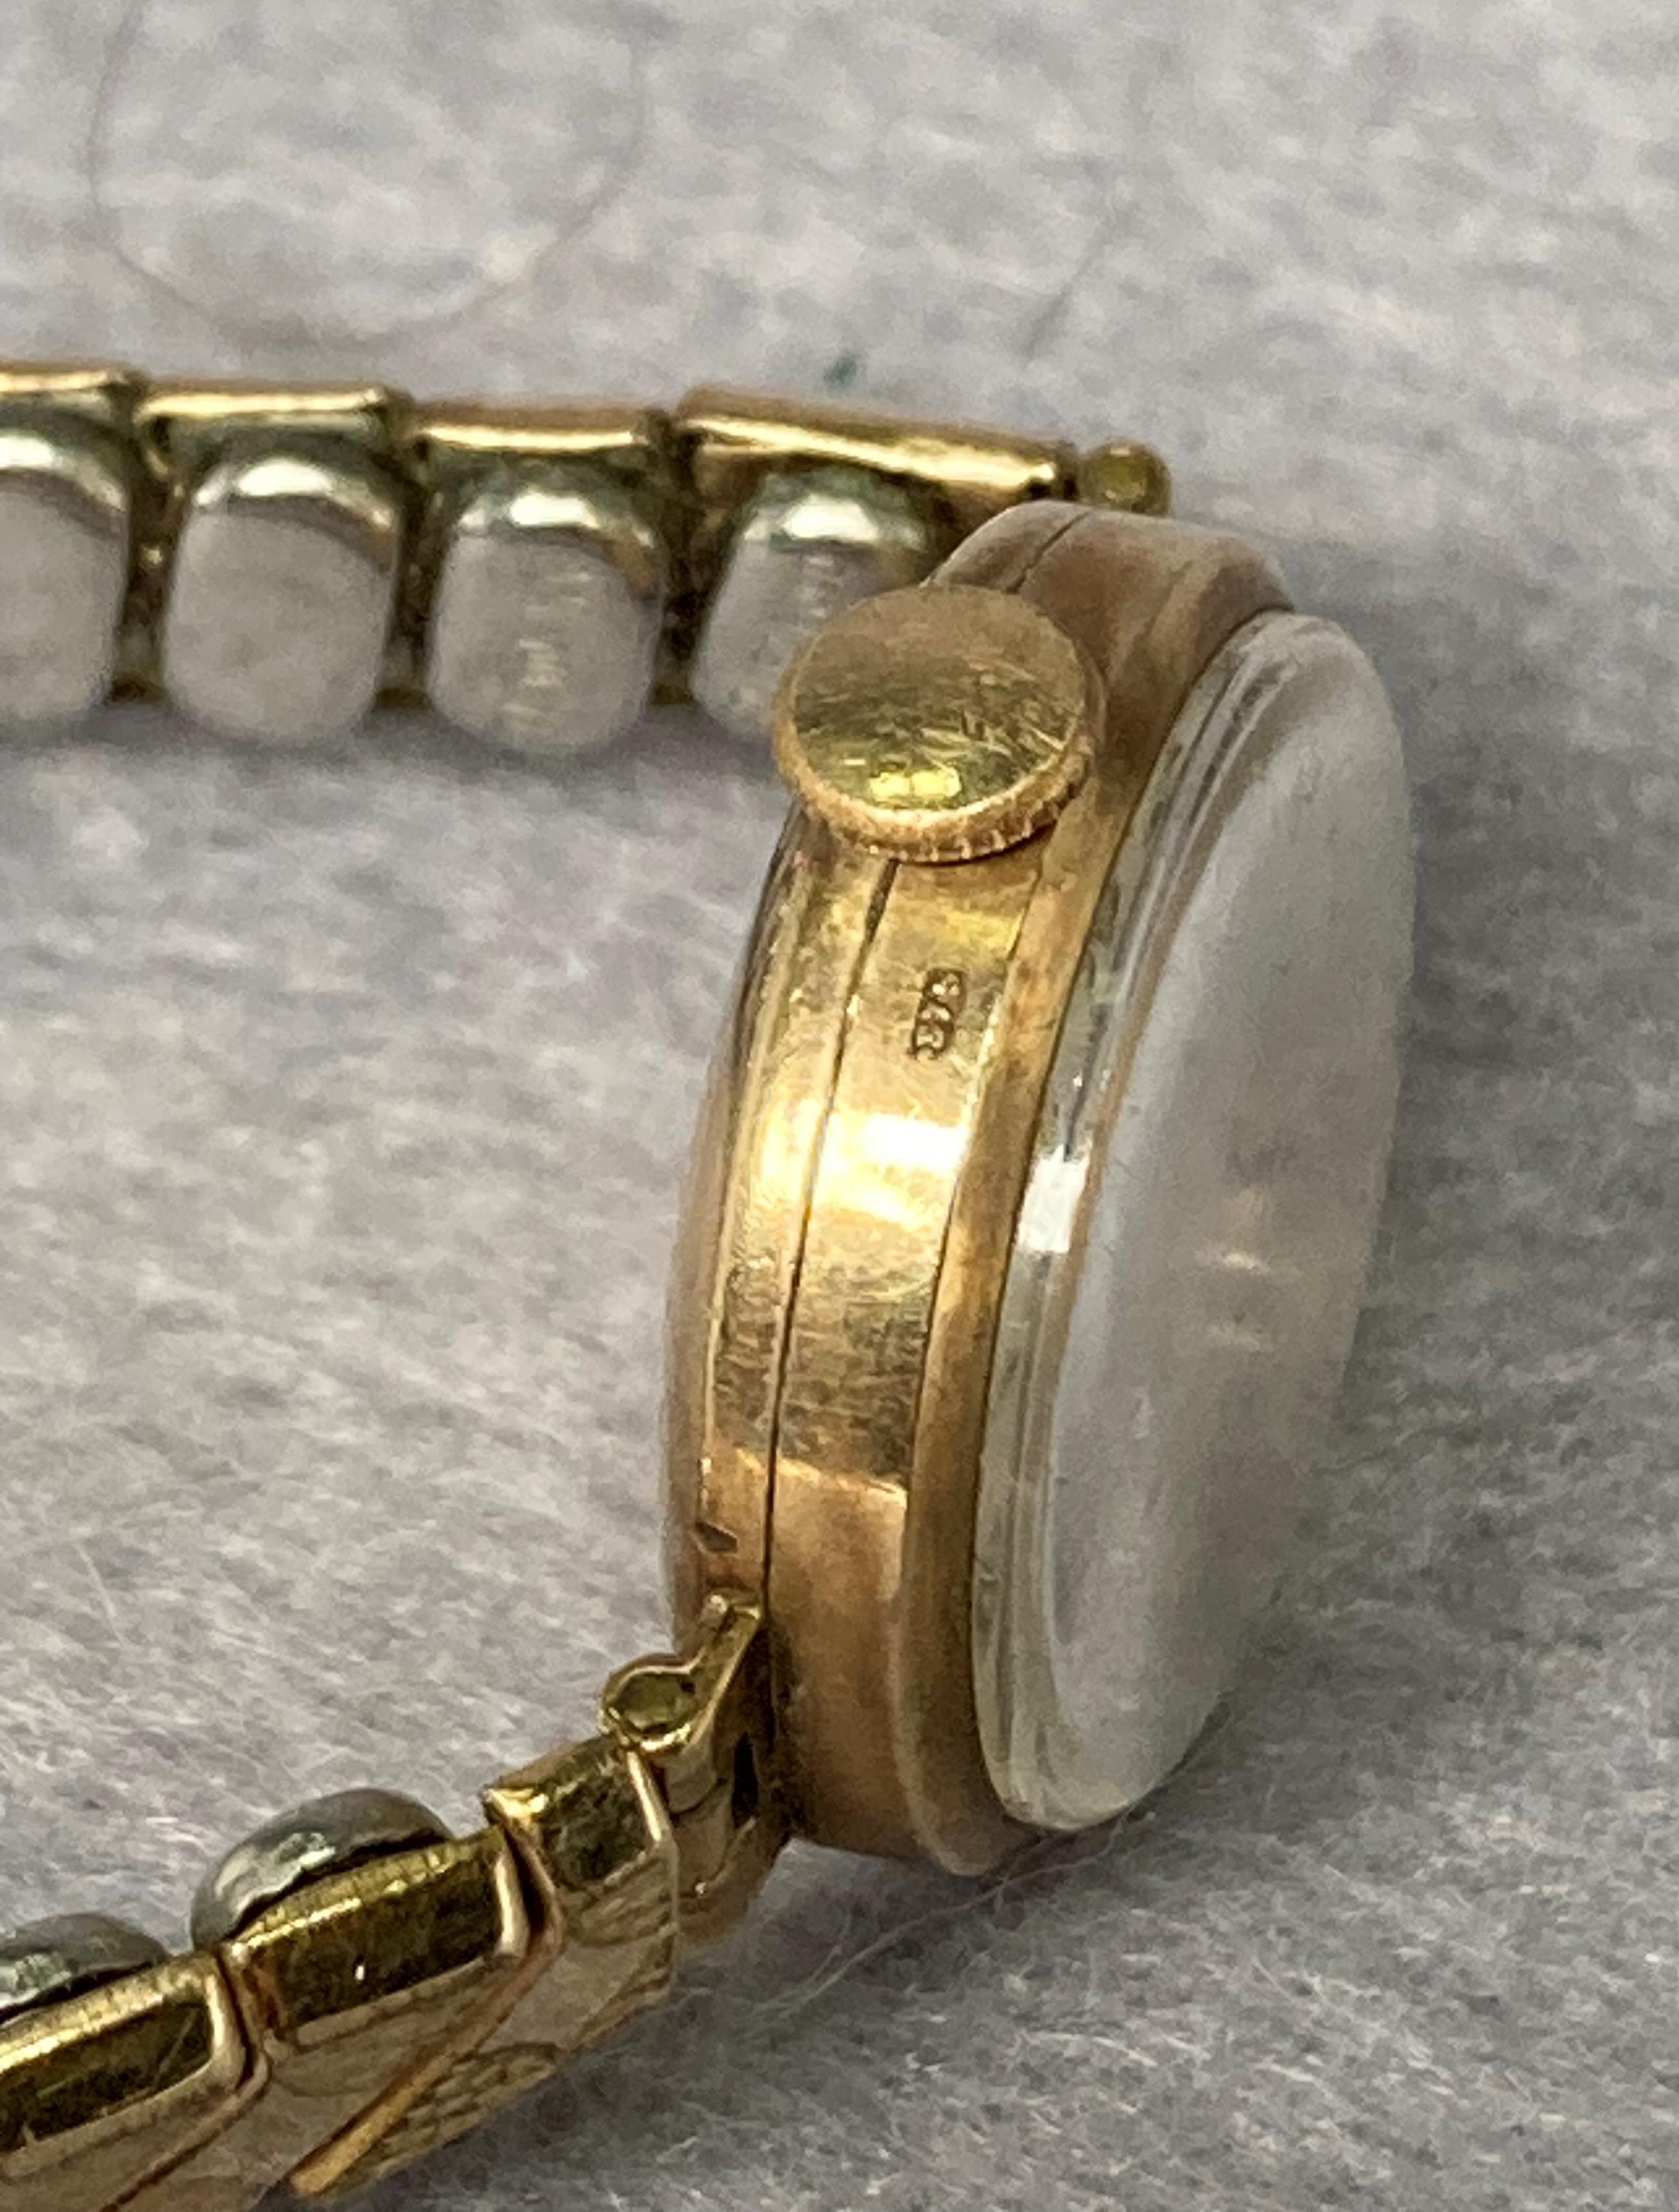 9ct gold (375) Aristo ladies watch with a rolled gold strap (saleroom location: S3 GC6) - Image 2 of 3